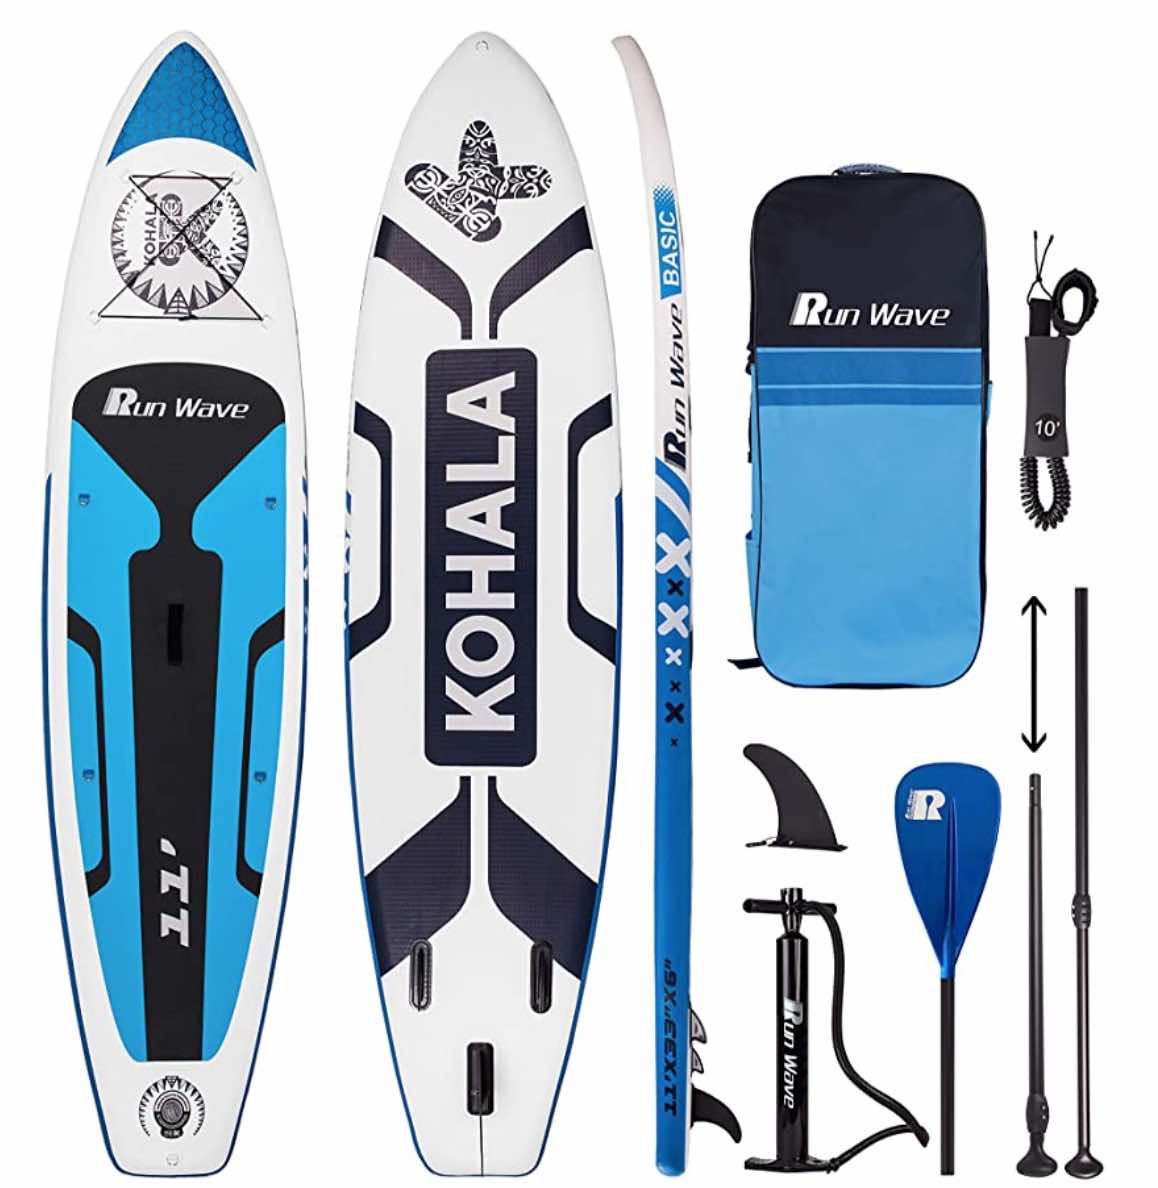 Run Wave 11 Foot Inflatable SUP Review